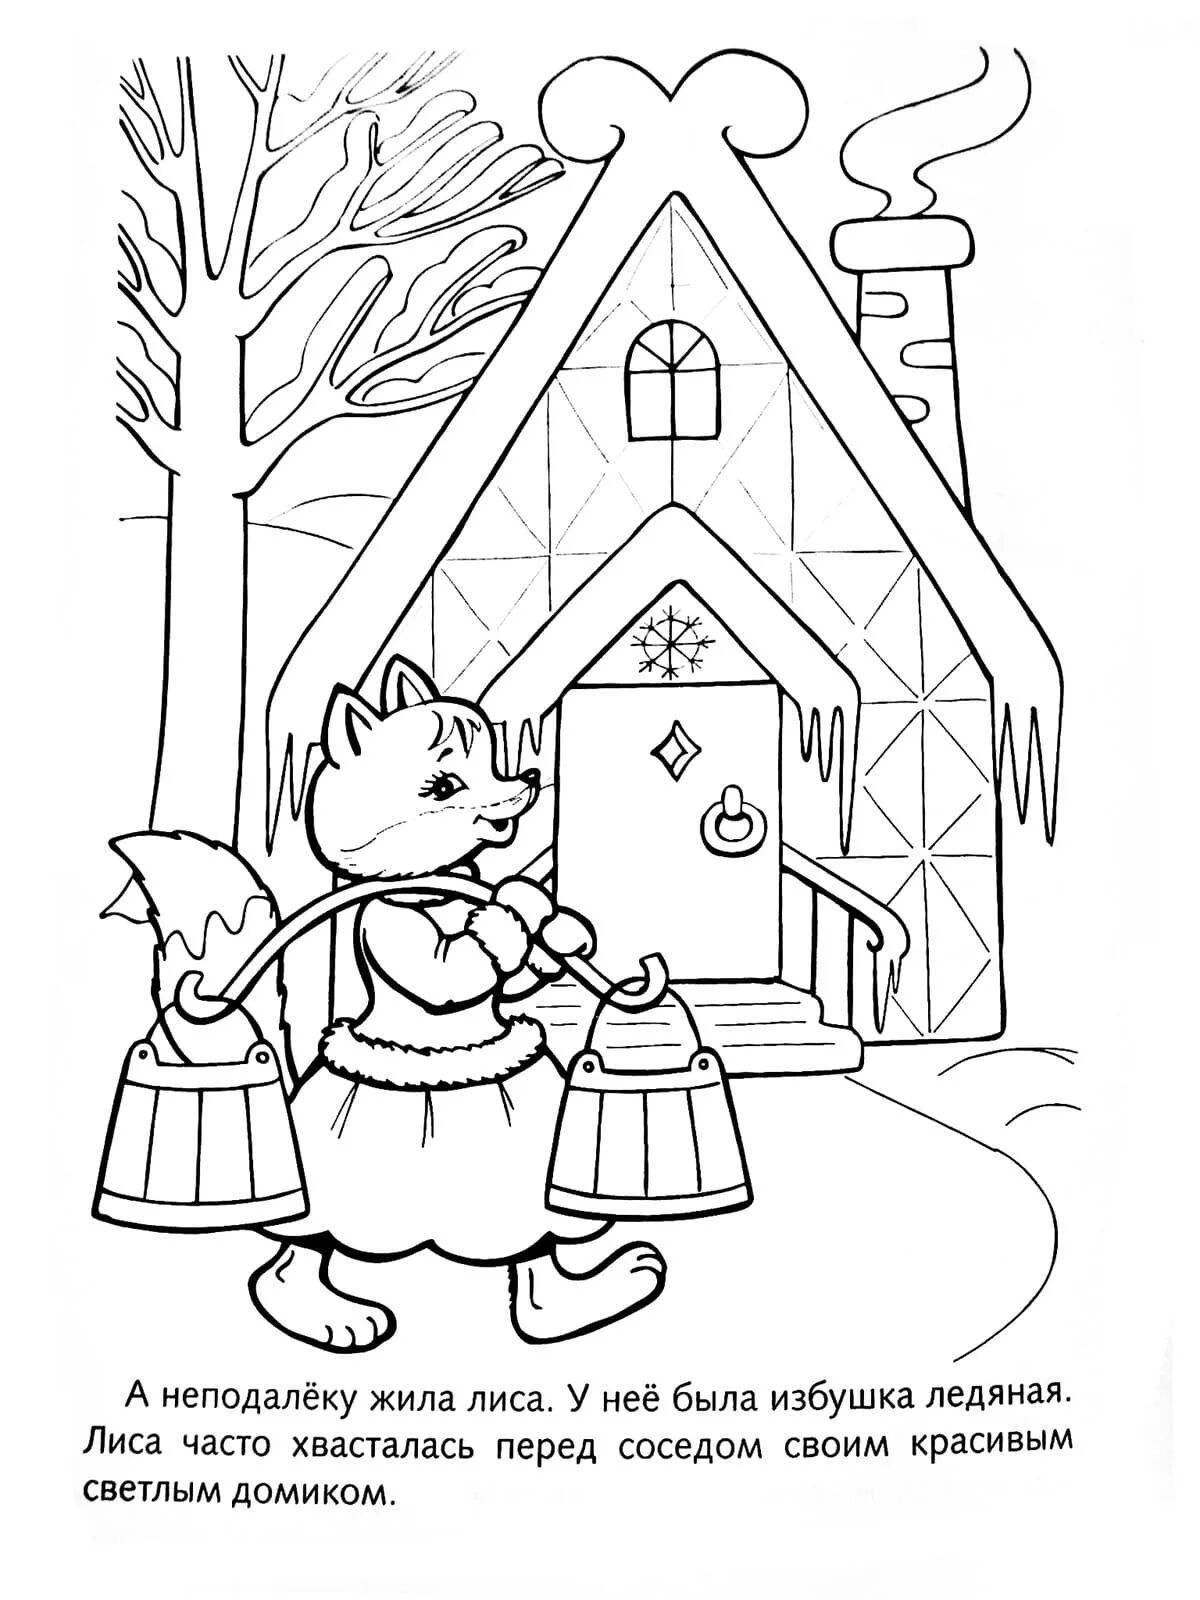 Coloring page elegant hare hut